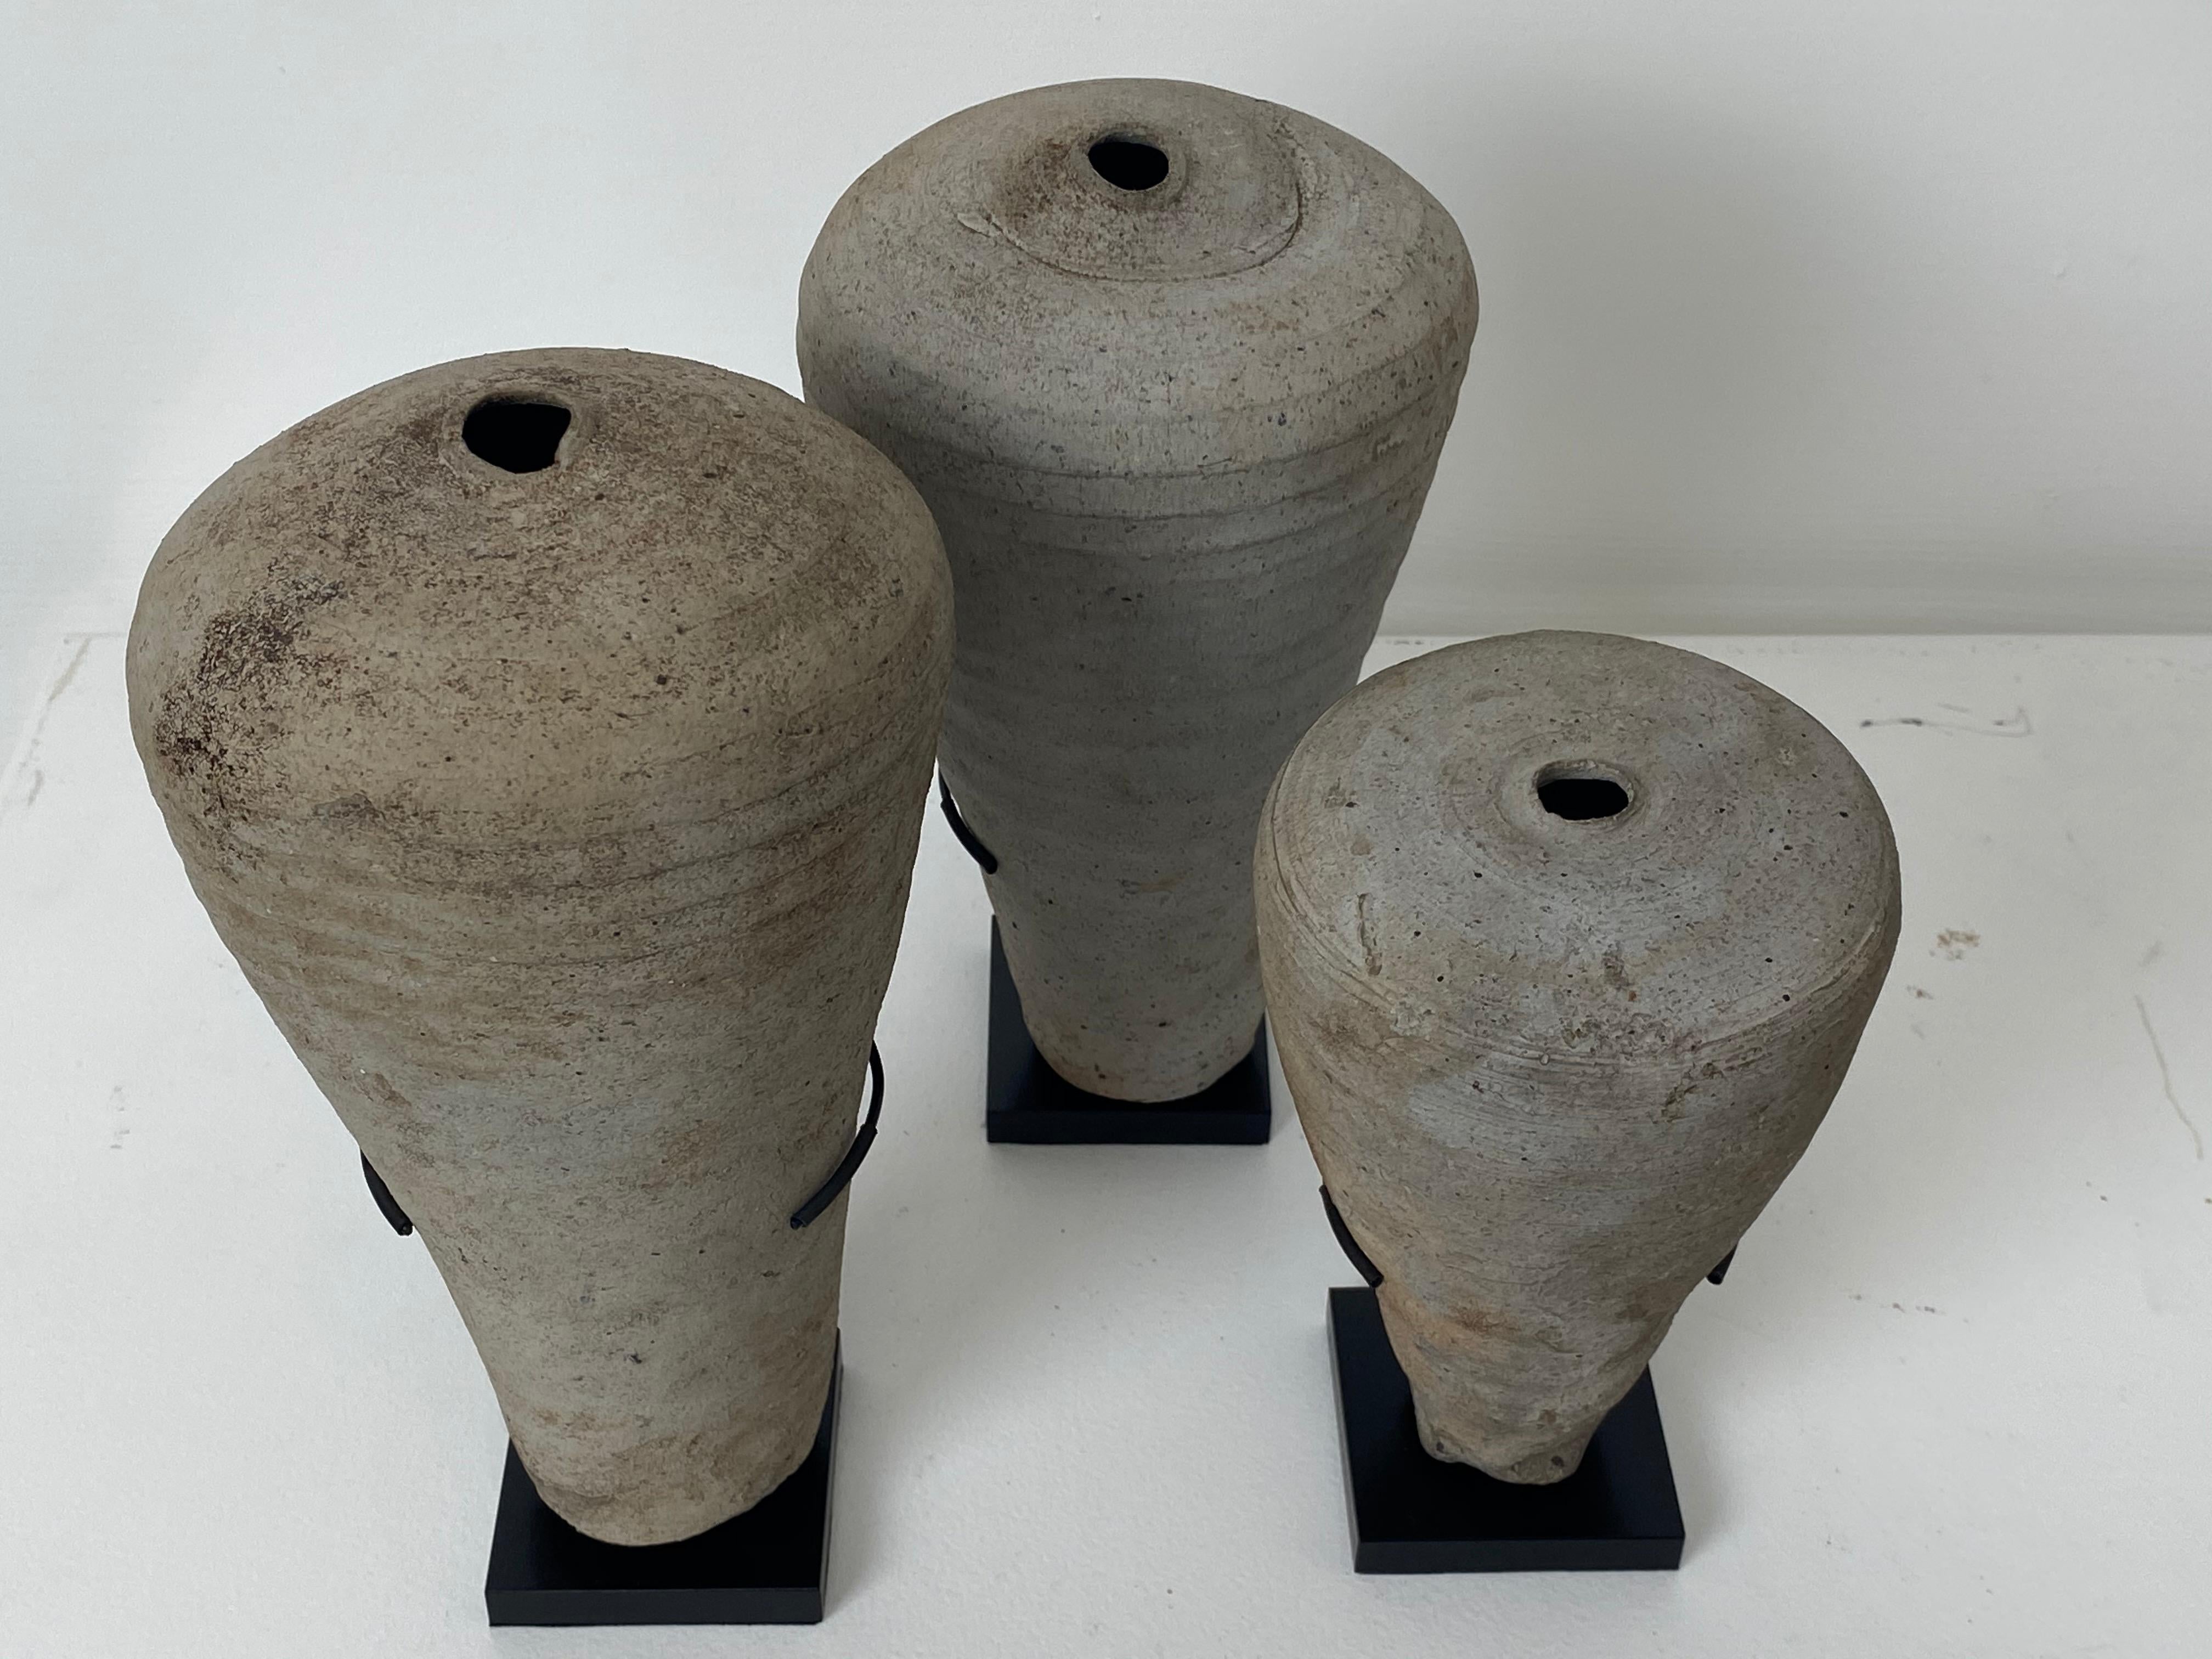 Nice set of 3 Asian oil lamps in terracotta from Thailand,
nice grey and natural patina, mounted on a metal stand
20th century
Different sizes:
21 cm high, 12 cm diameter
22 cm high, 12 cm diameter
16 cm high, 10 cm diameter.